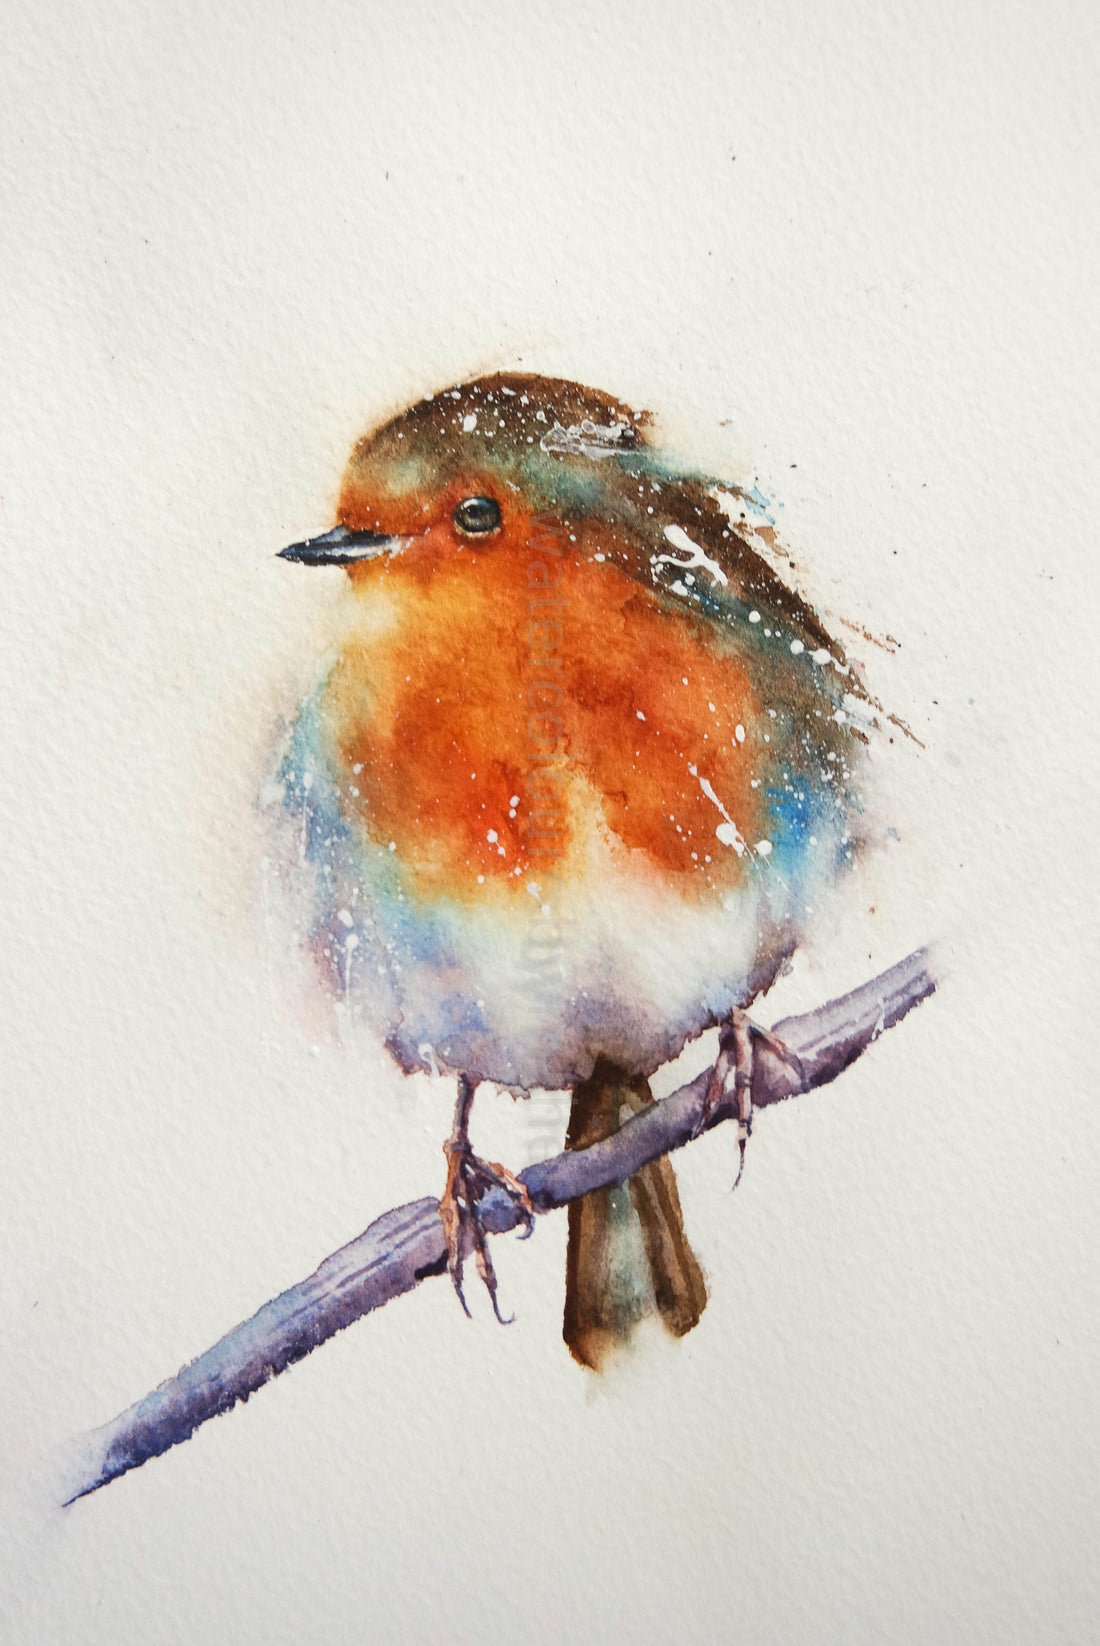 A new robin from an old one...